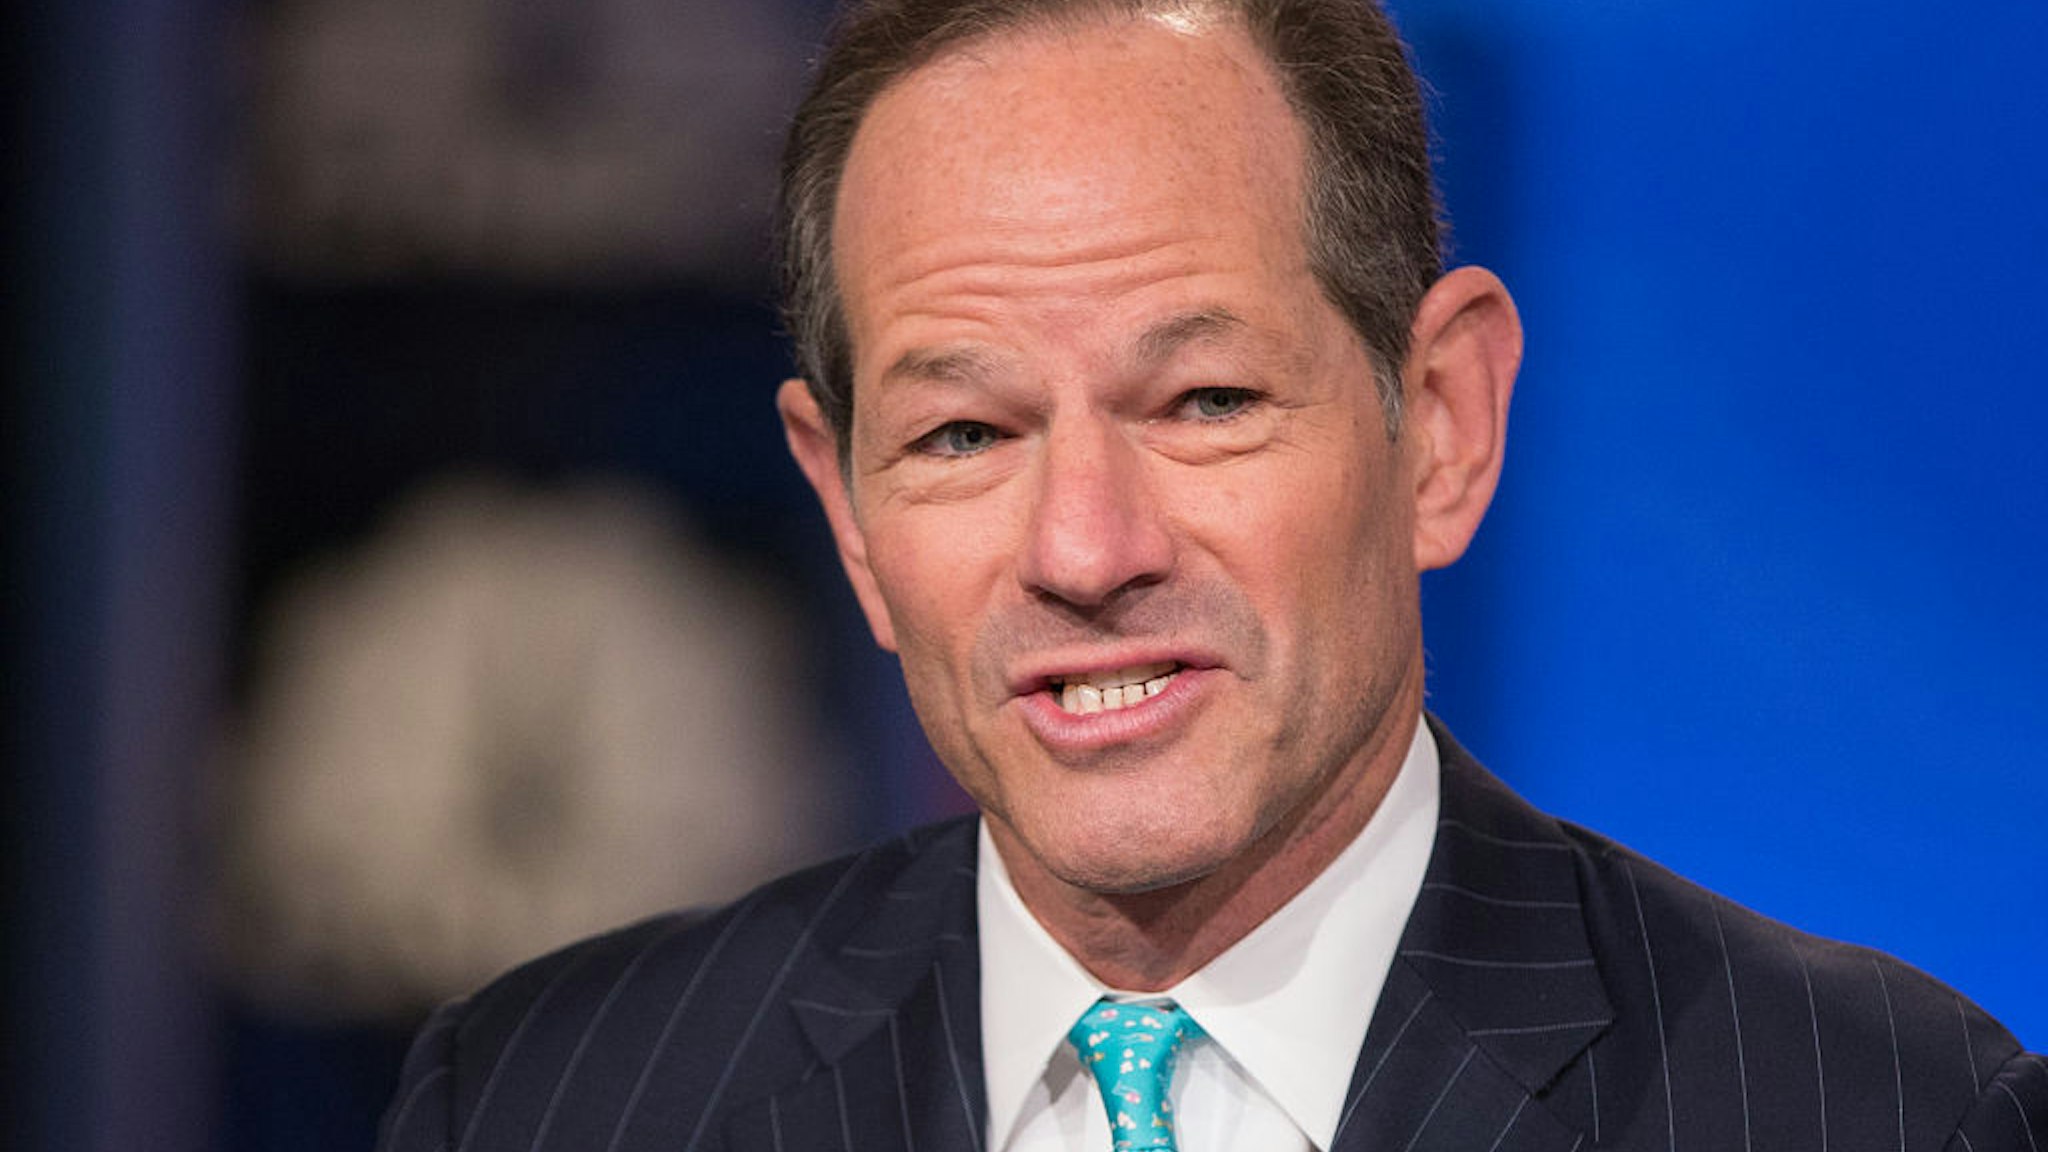 SQUAWK BOX -- Pictured: Eliot Spitzer, Democratic Party politician and former Governor of New York, in an interview on January 5, 2015 -- (Photo by: Adam Jeffery/CNBC/NBCU Photo Bank/NBCUniversal via Getty Images)